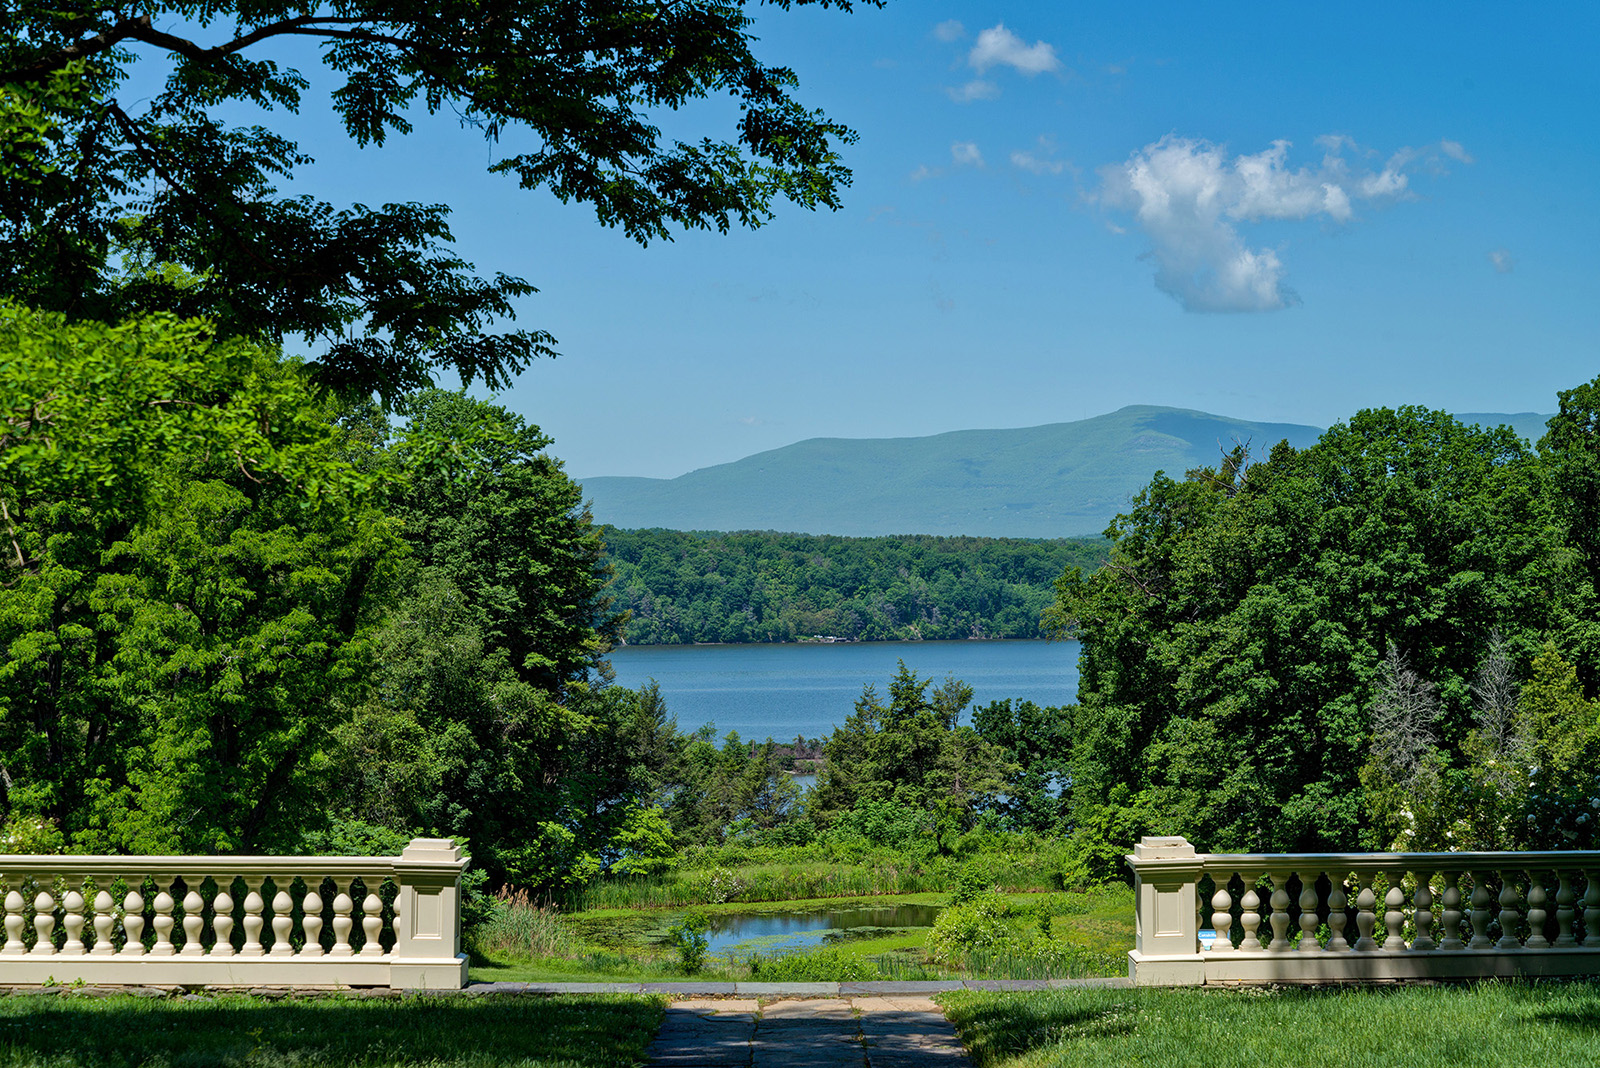 Bard College Awarded $26,532 Grant from New World Foundation and Partners for Climate Action Hudson Valley for Sustainability Project